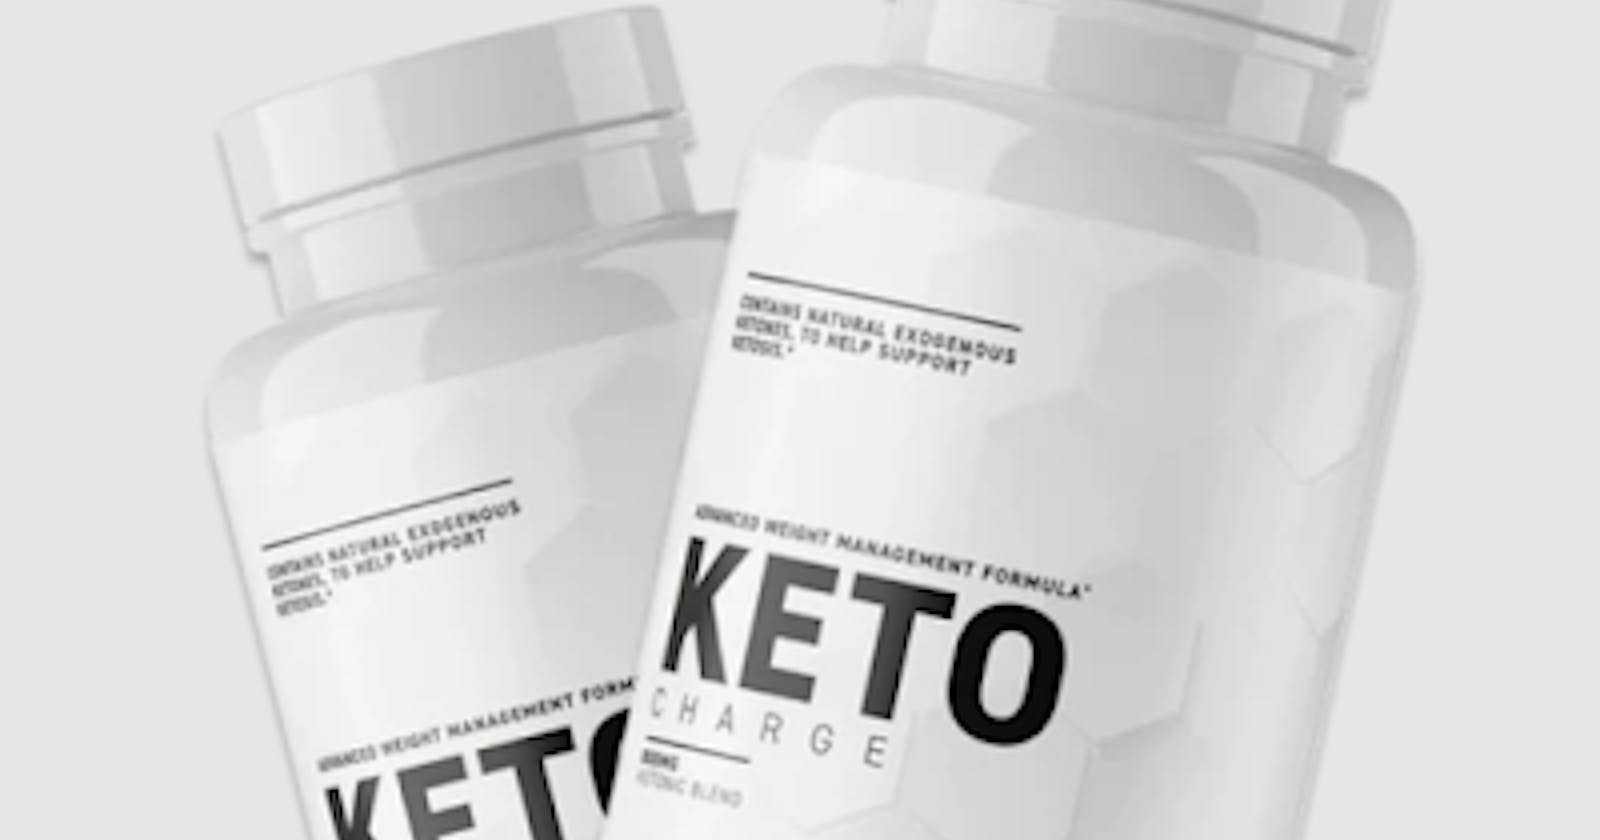 KetoCharge Australia Reviews: Best Offers, Price and Buy?